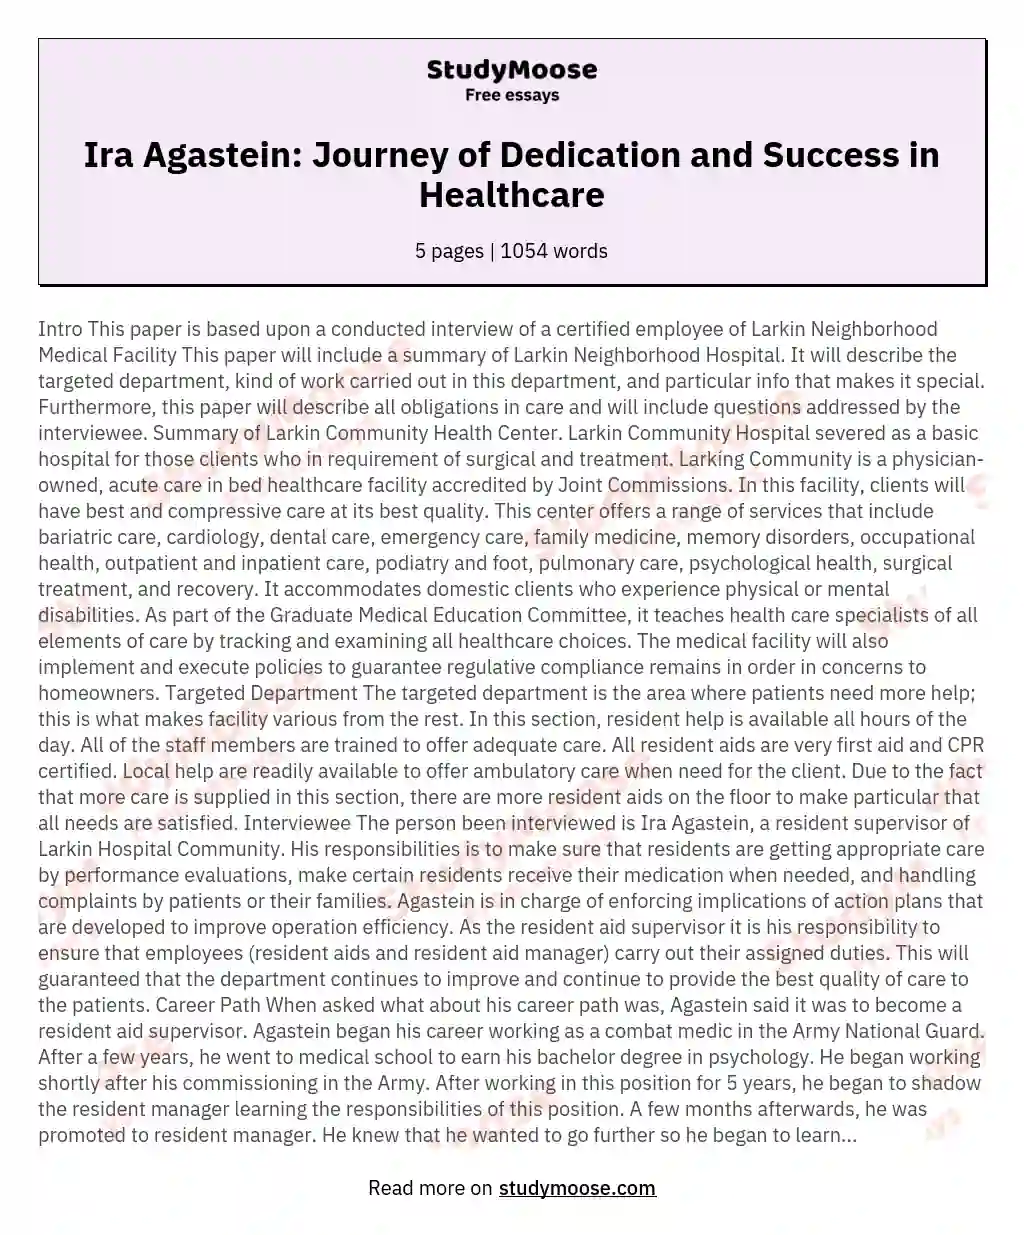 Ira Agastein: Journey of Dedication and Success in Healthcare essay